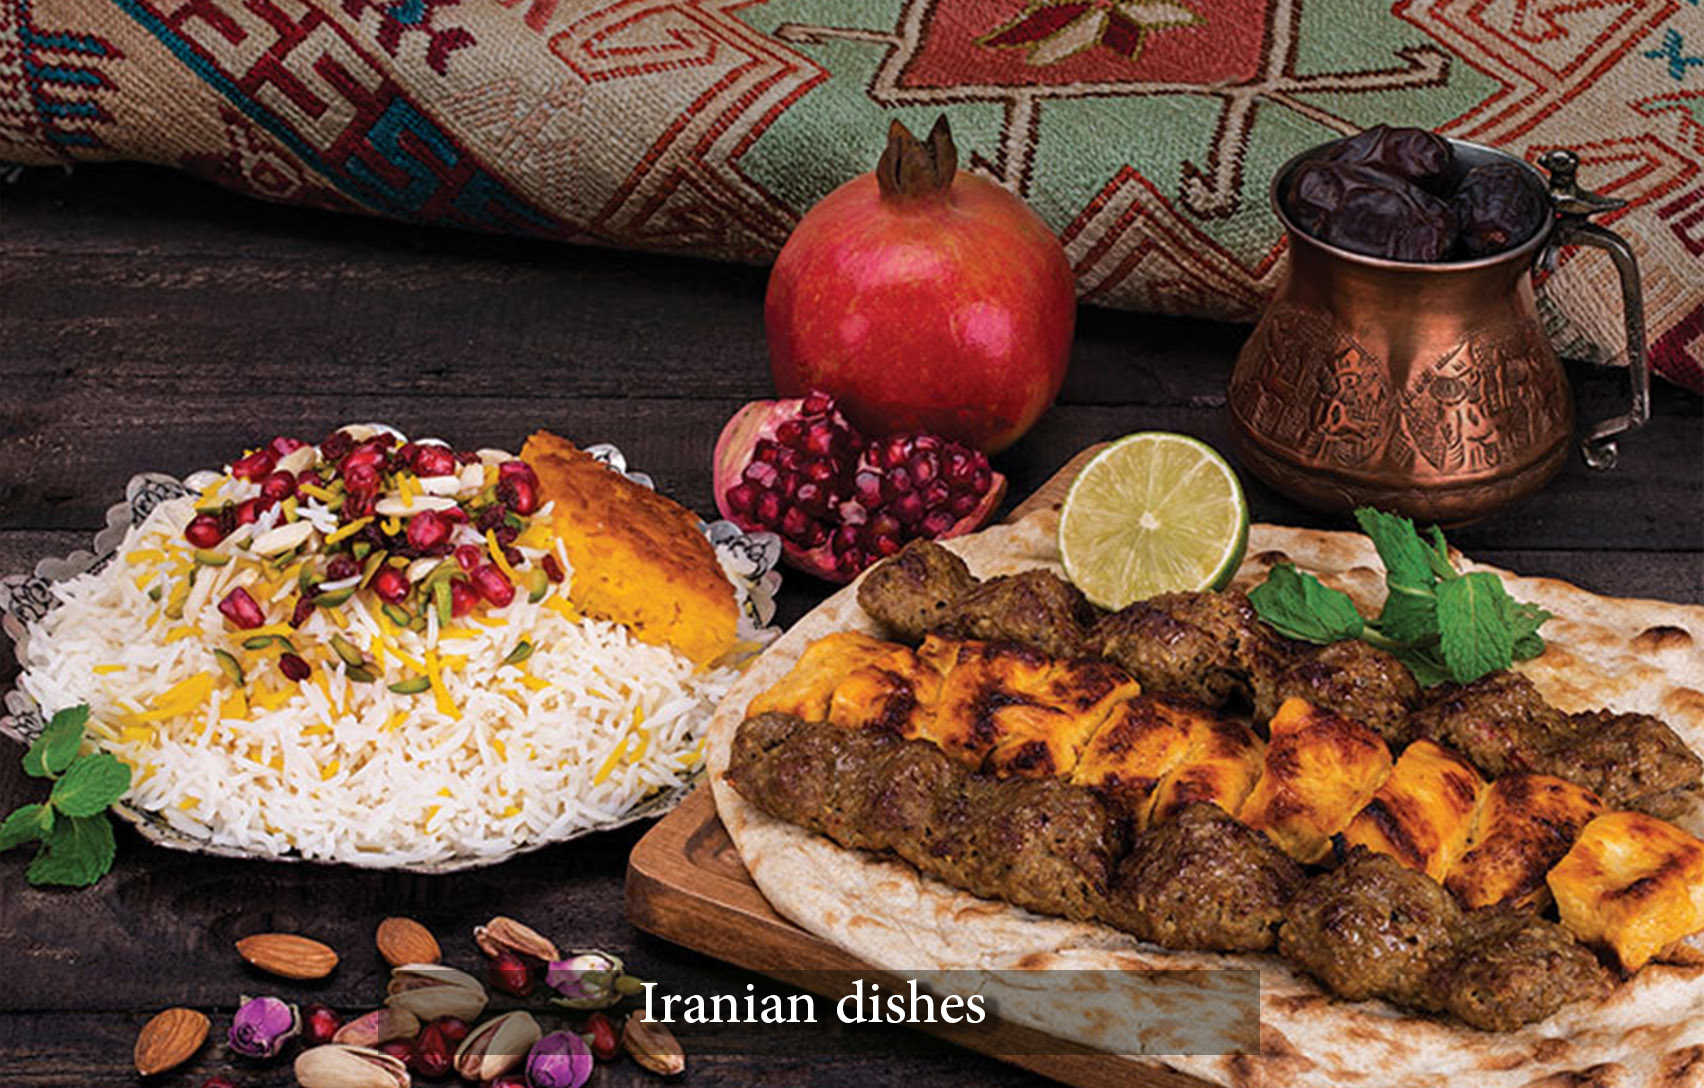 travel to Iran for: Iranian dishes